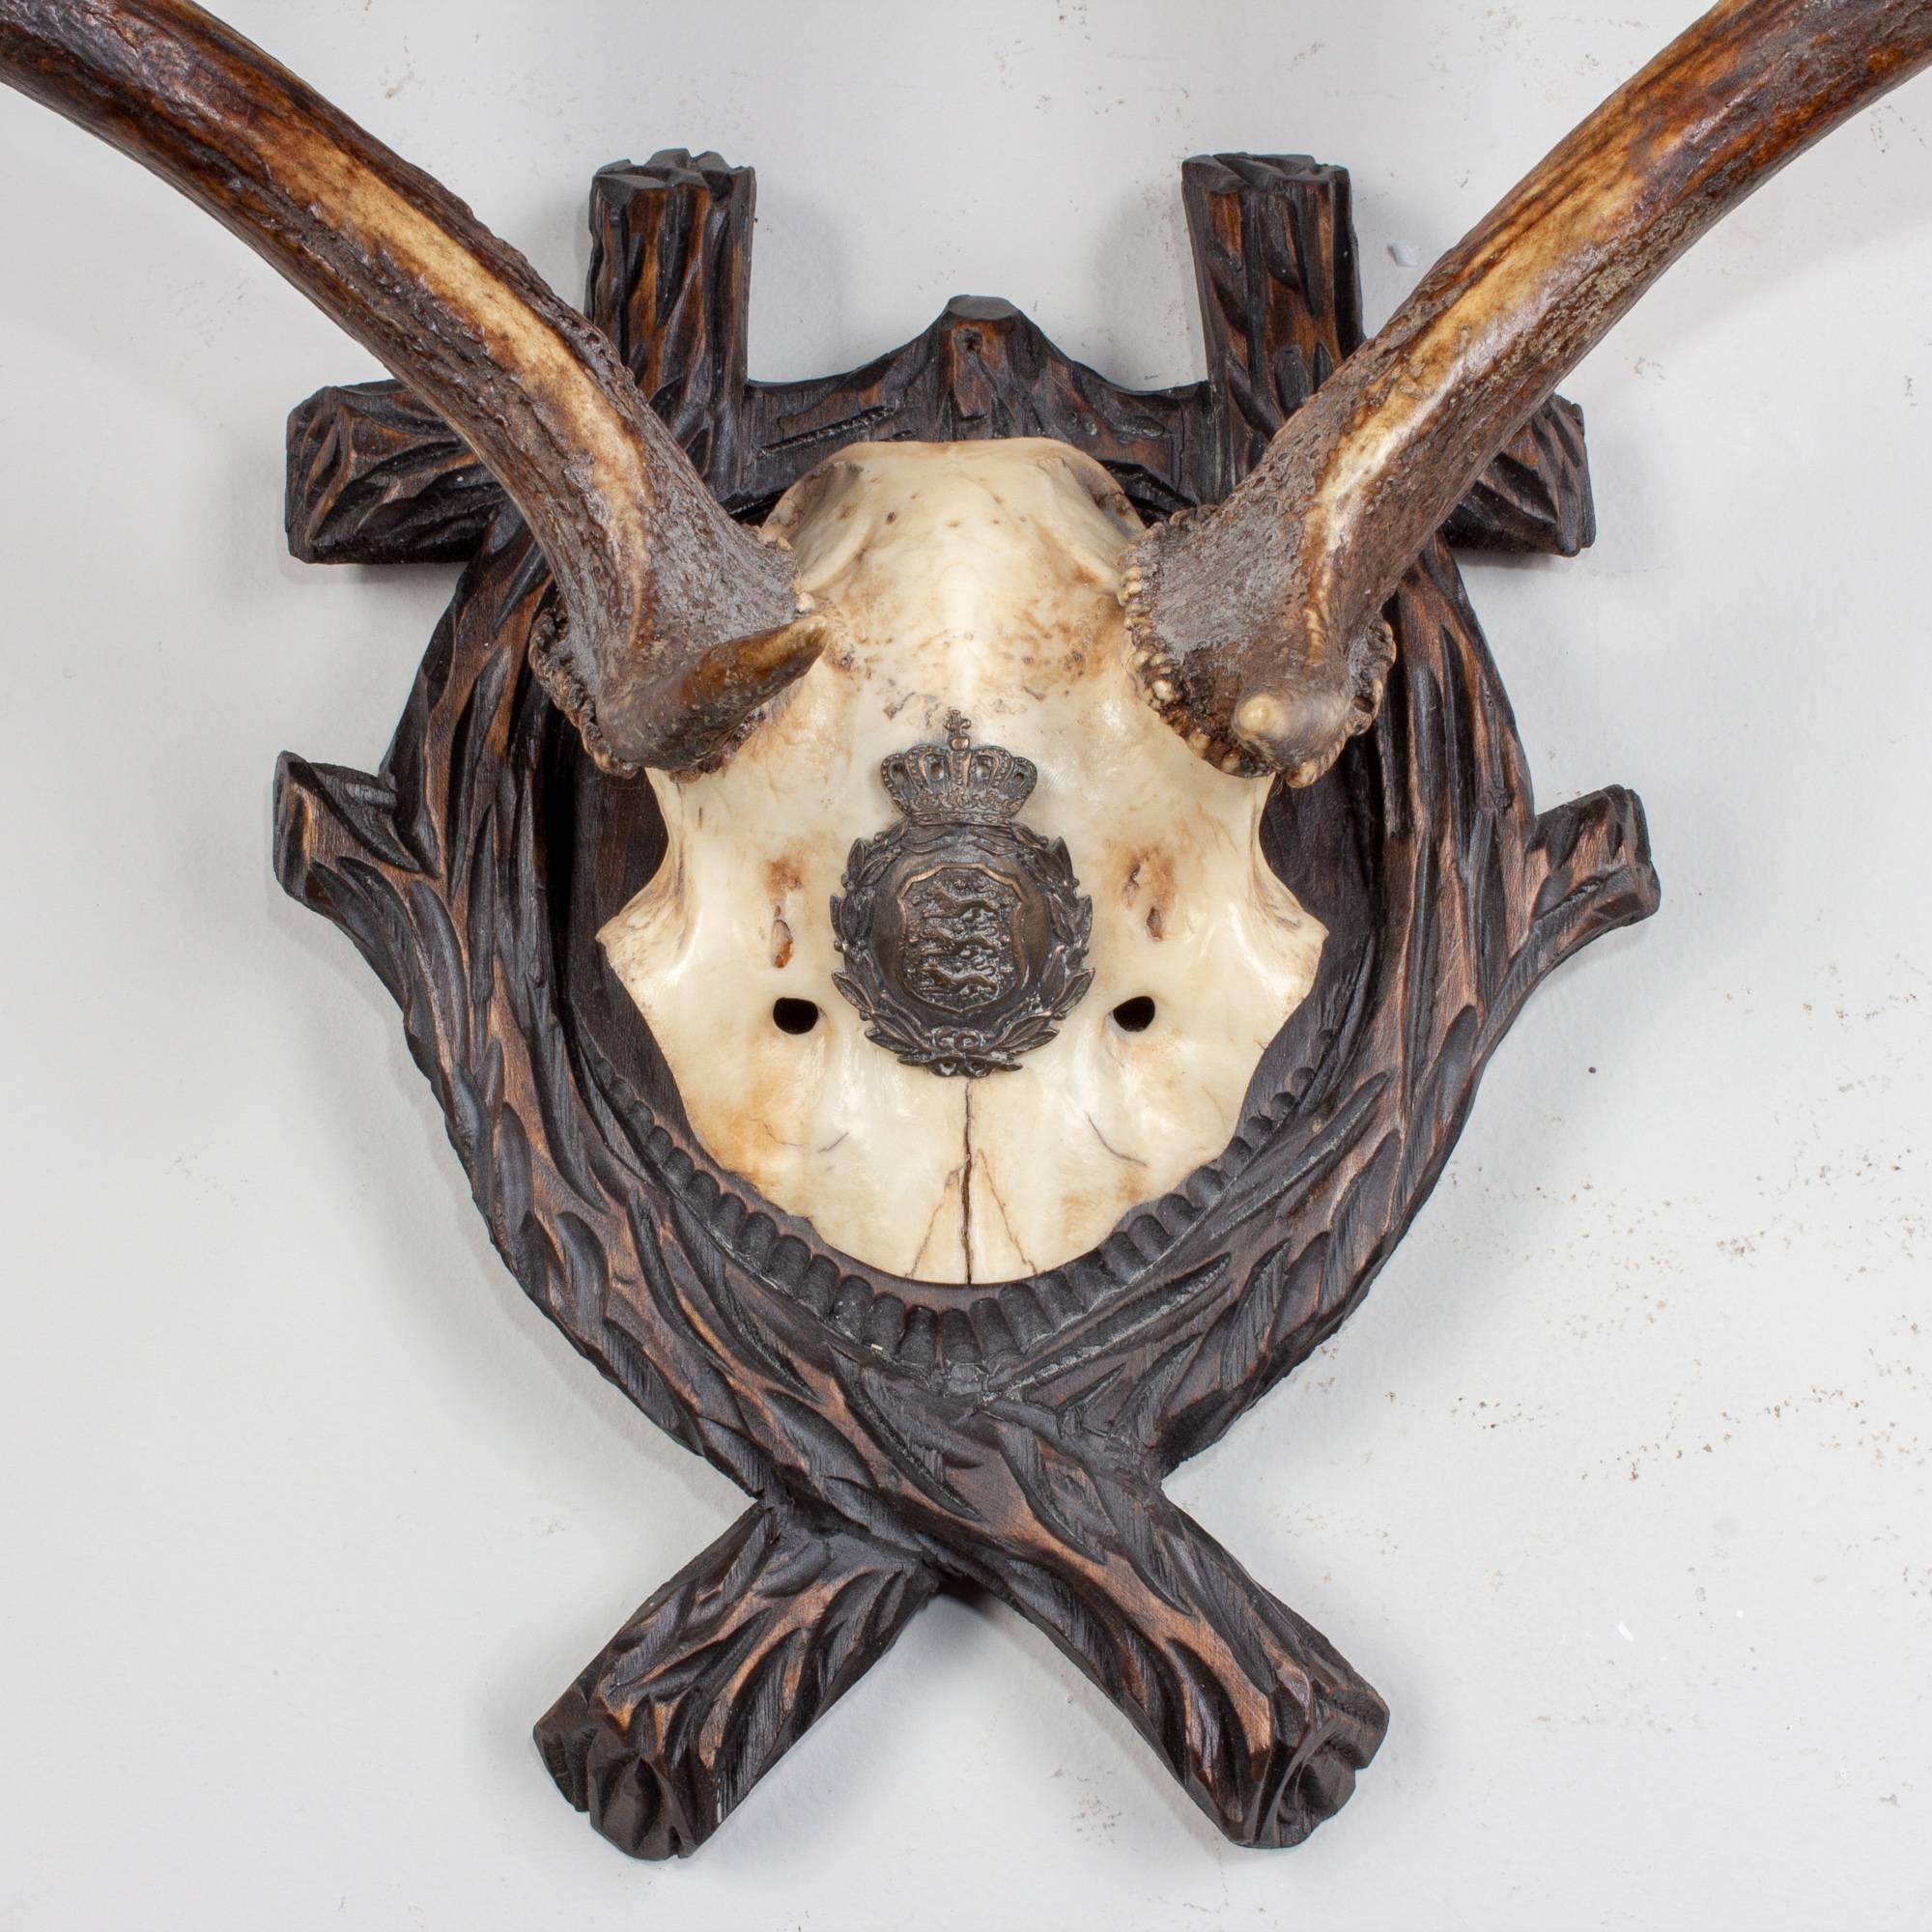 19th century Austrian fallow deer trophy on original Black Forest carved plaque that hung in Emperor Franz Josef's castle at Eckartsau in the Southern Austrian Alps. Eckartsau was a favourite hunting schloss of the Habsburg family. The plaque itself